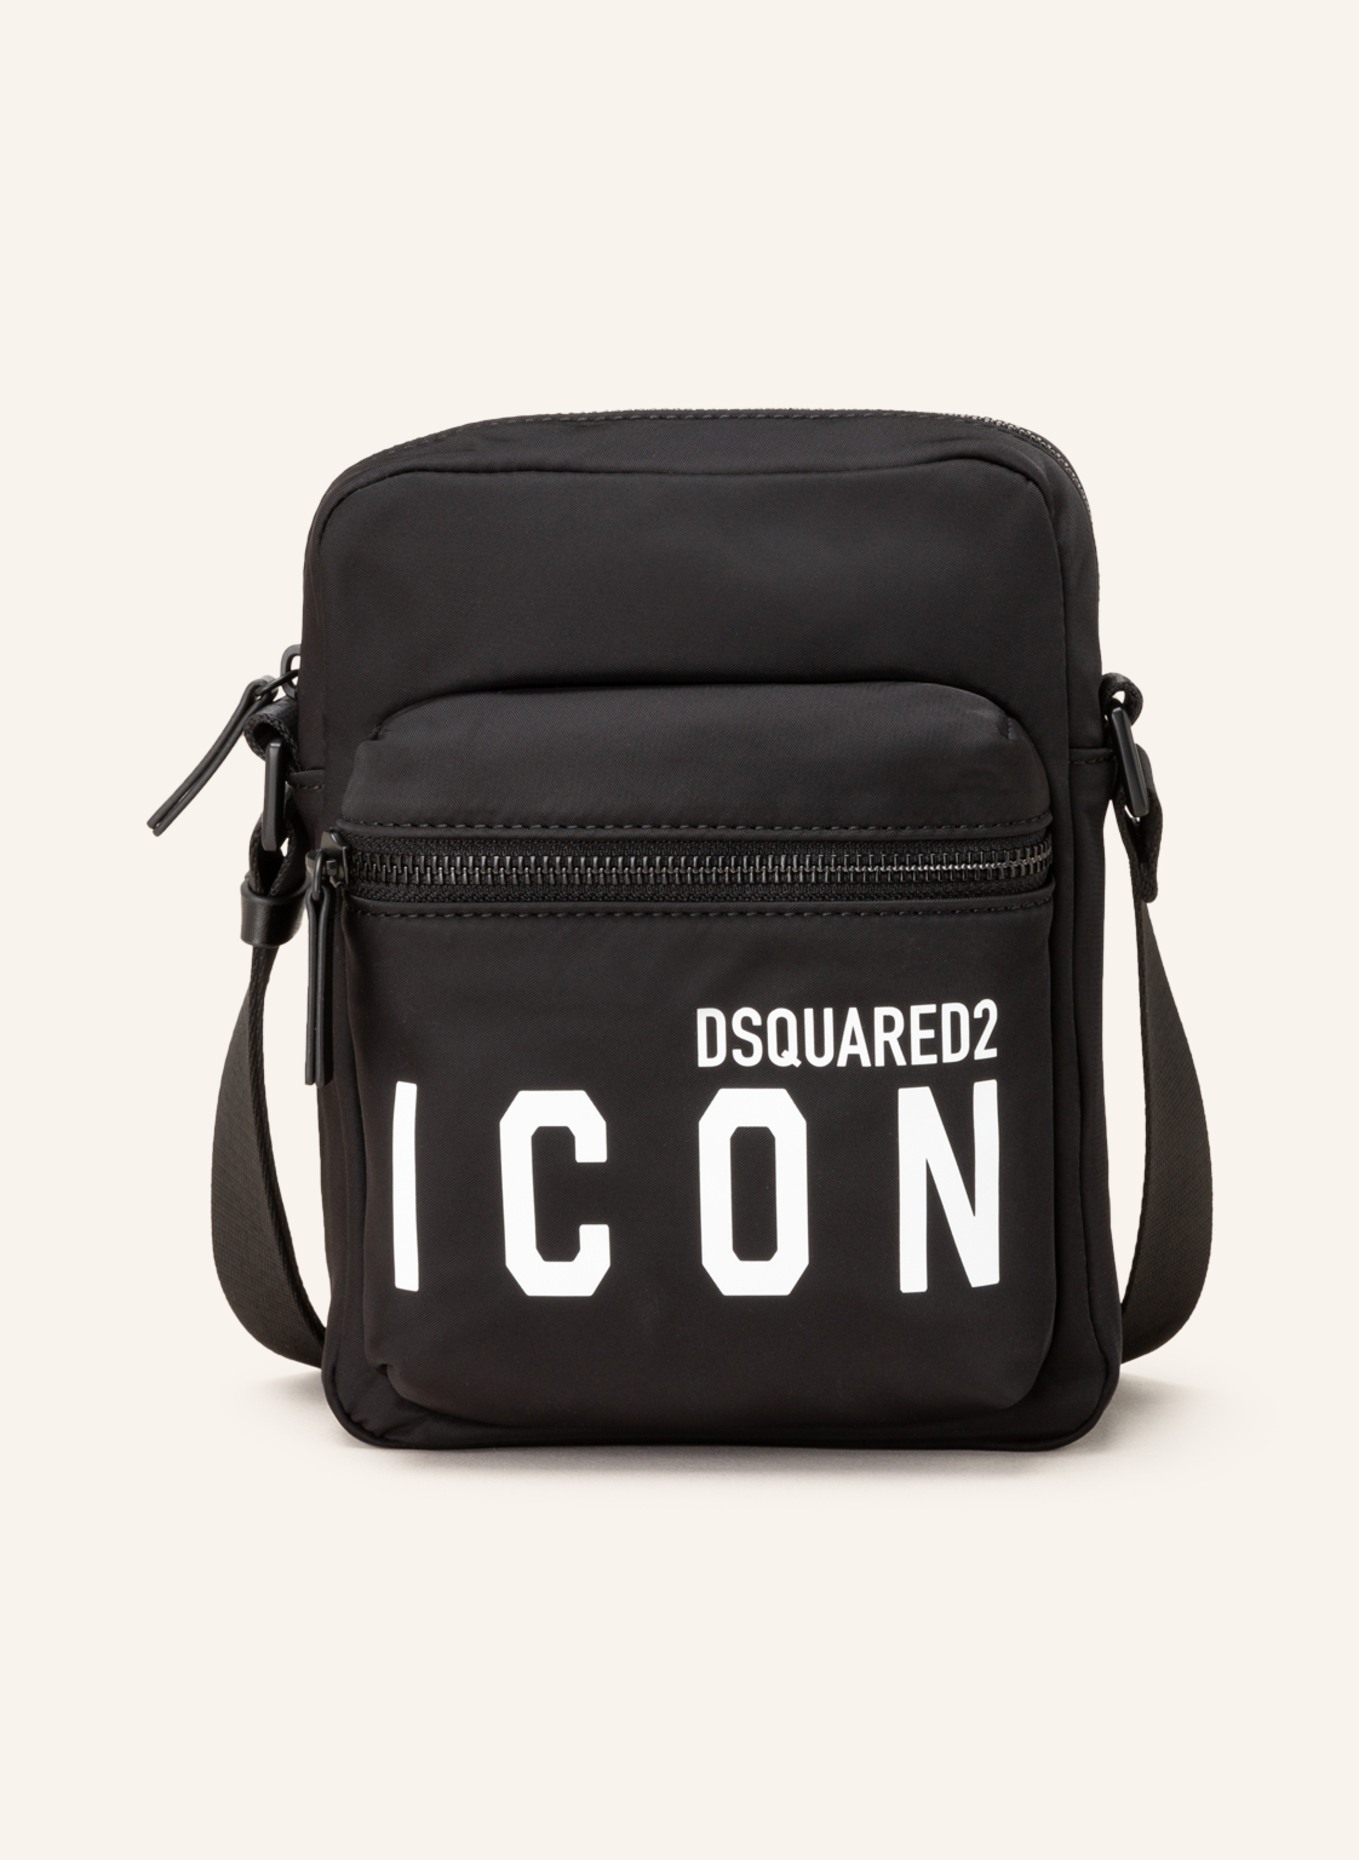 DSquared2 Iridescent Tote Bag | The Fragrance Shop